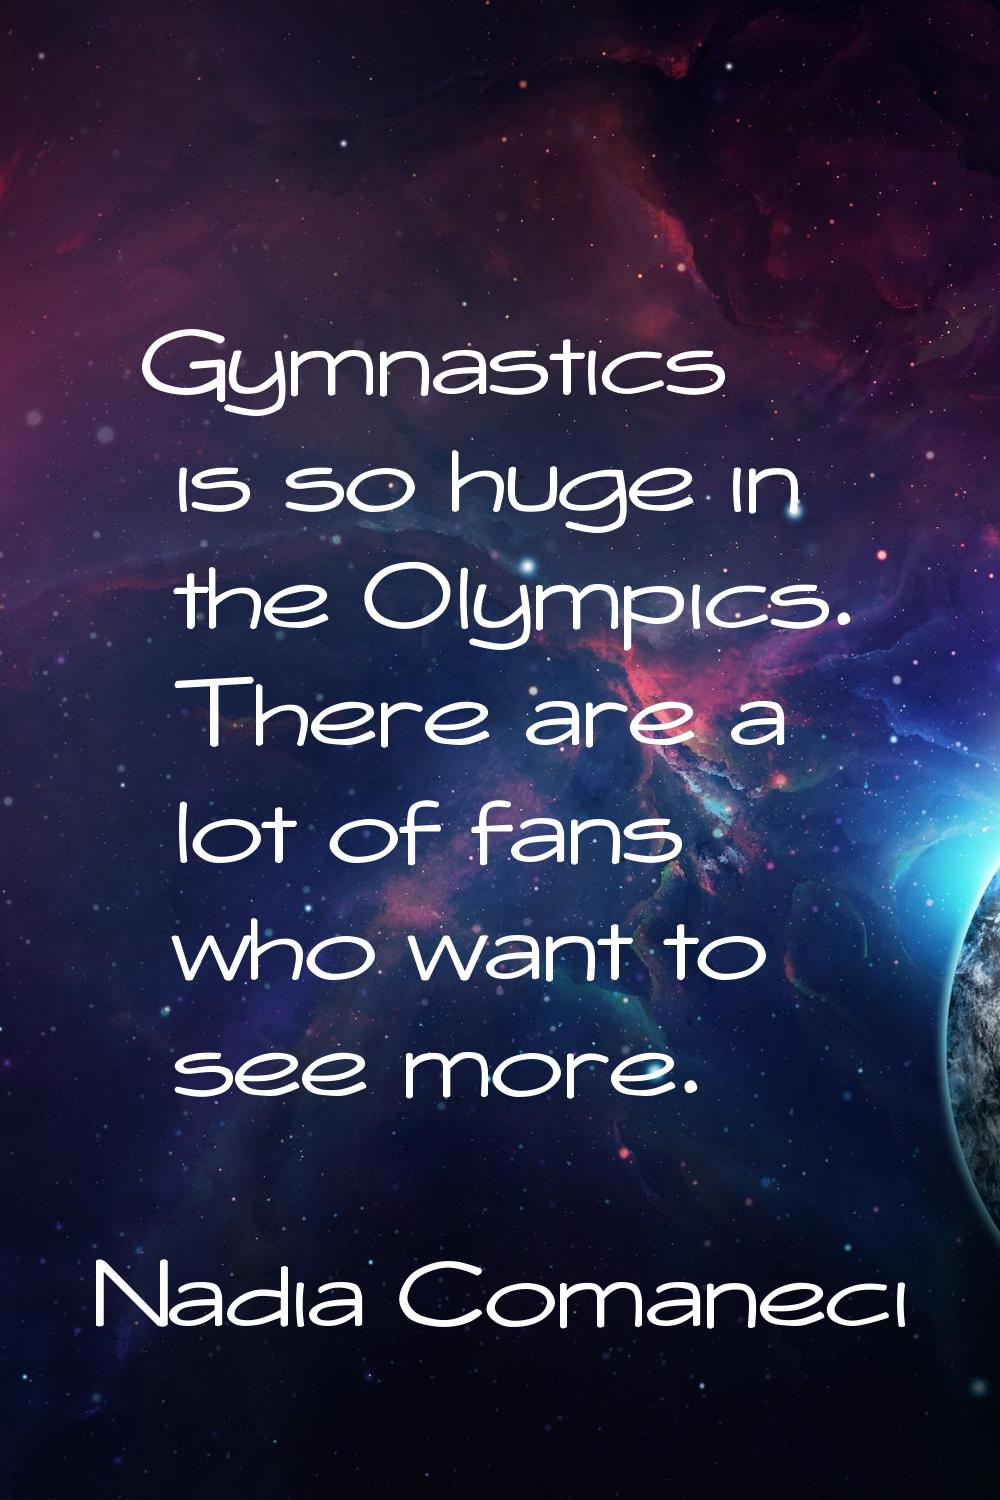 Gymnastics is so huge in the Olympics. There are a lot of fans who want to see more.